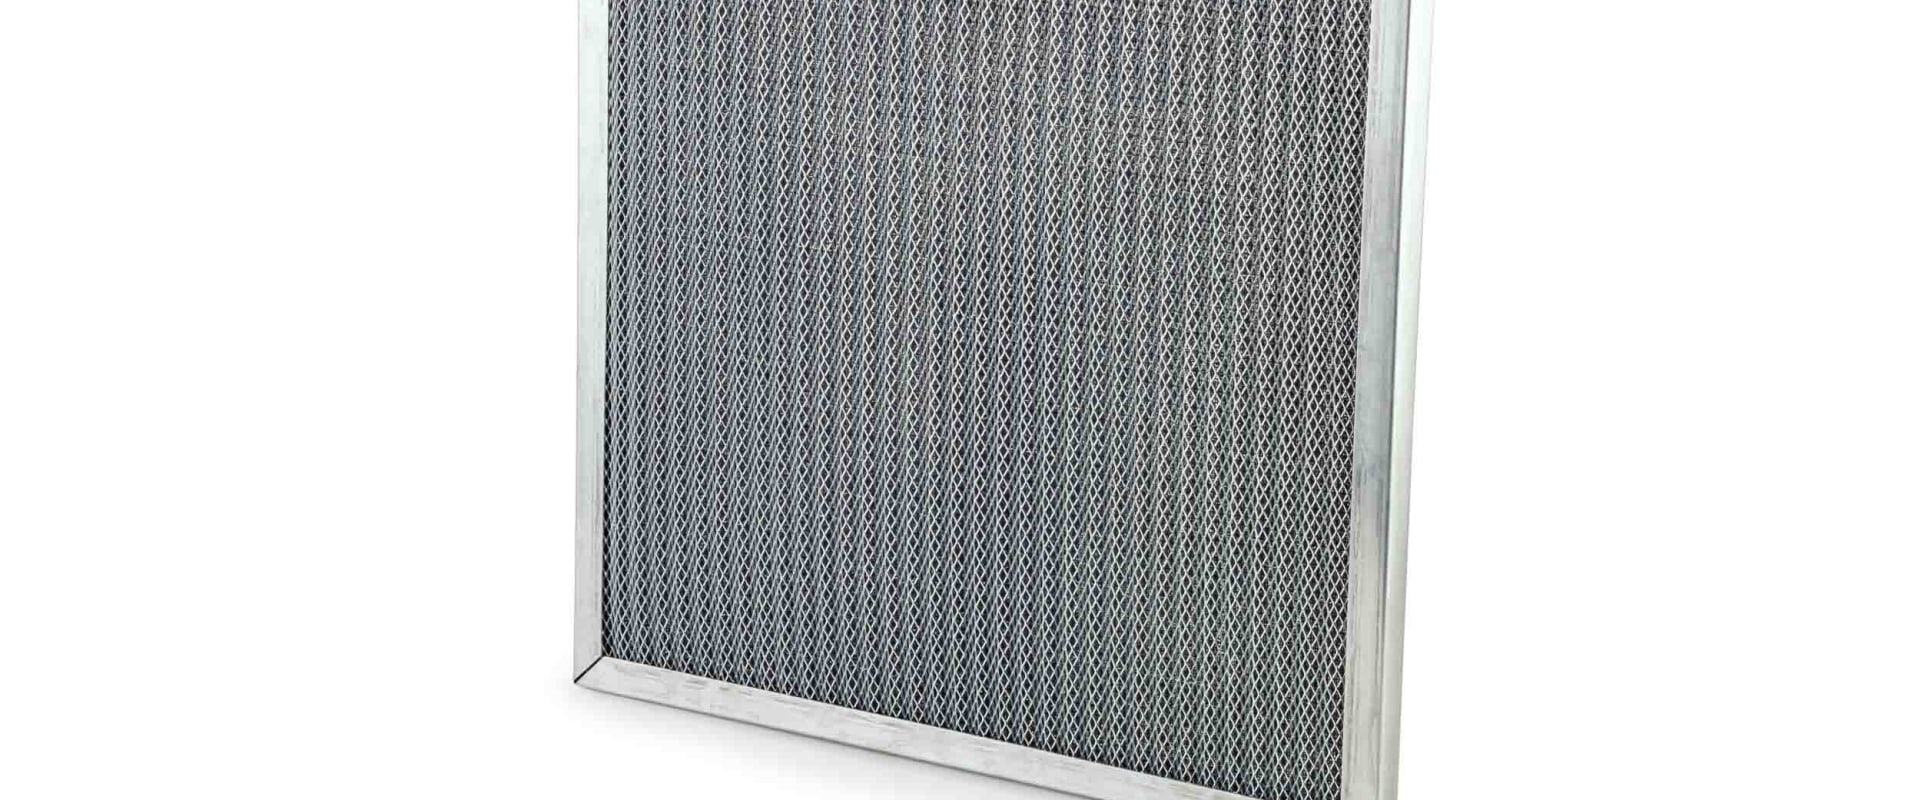 Are Electrostatic Air Filters the Best Choice for Your Home?